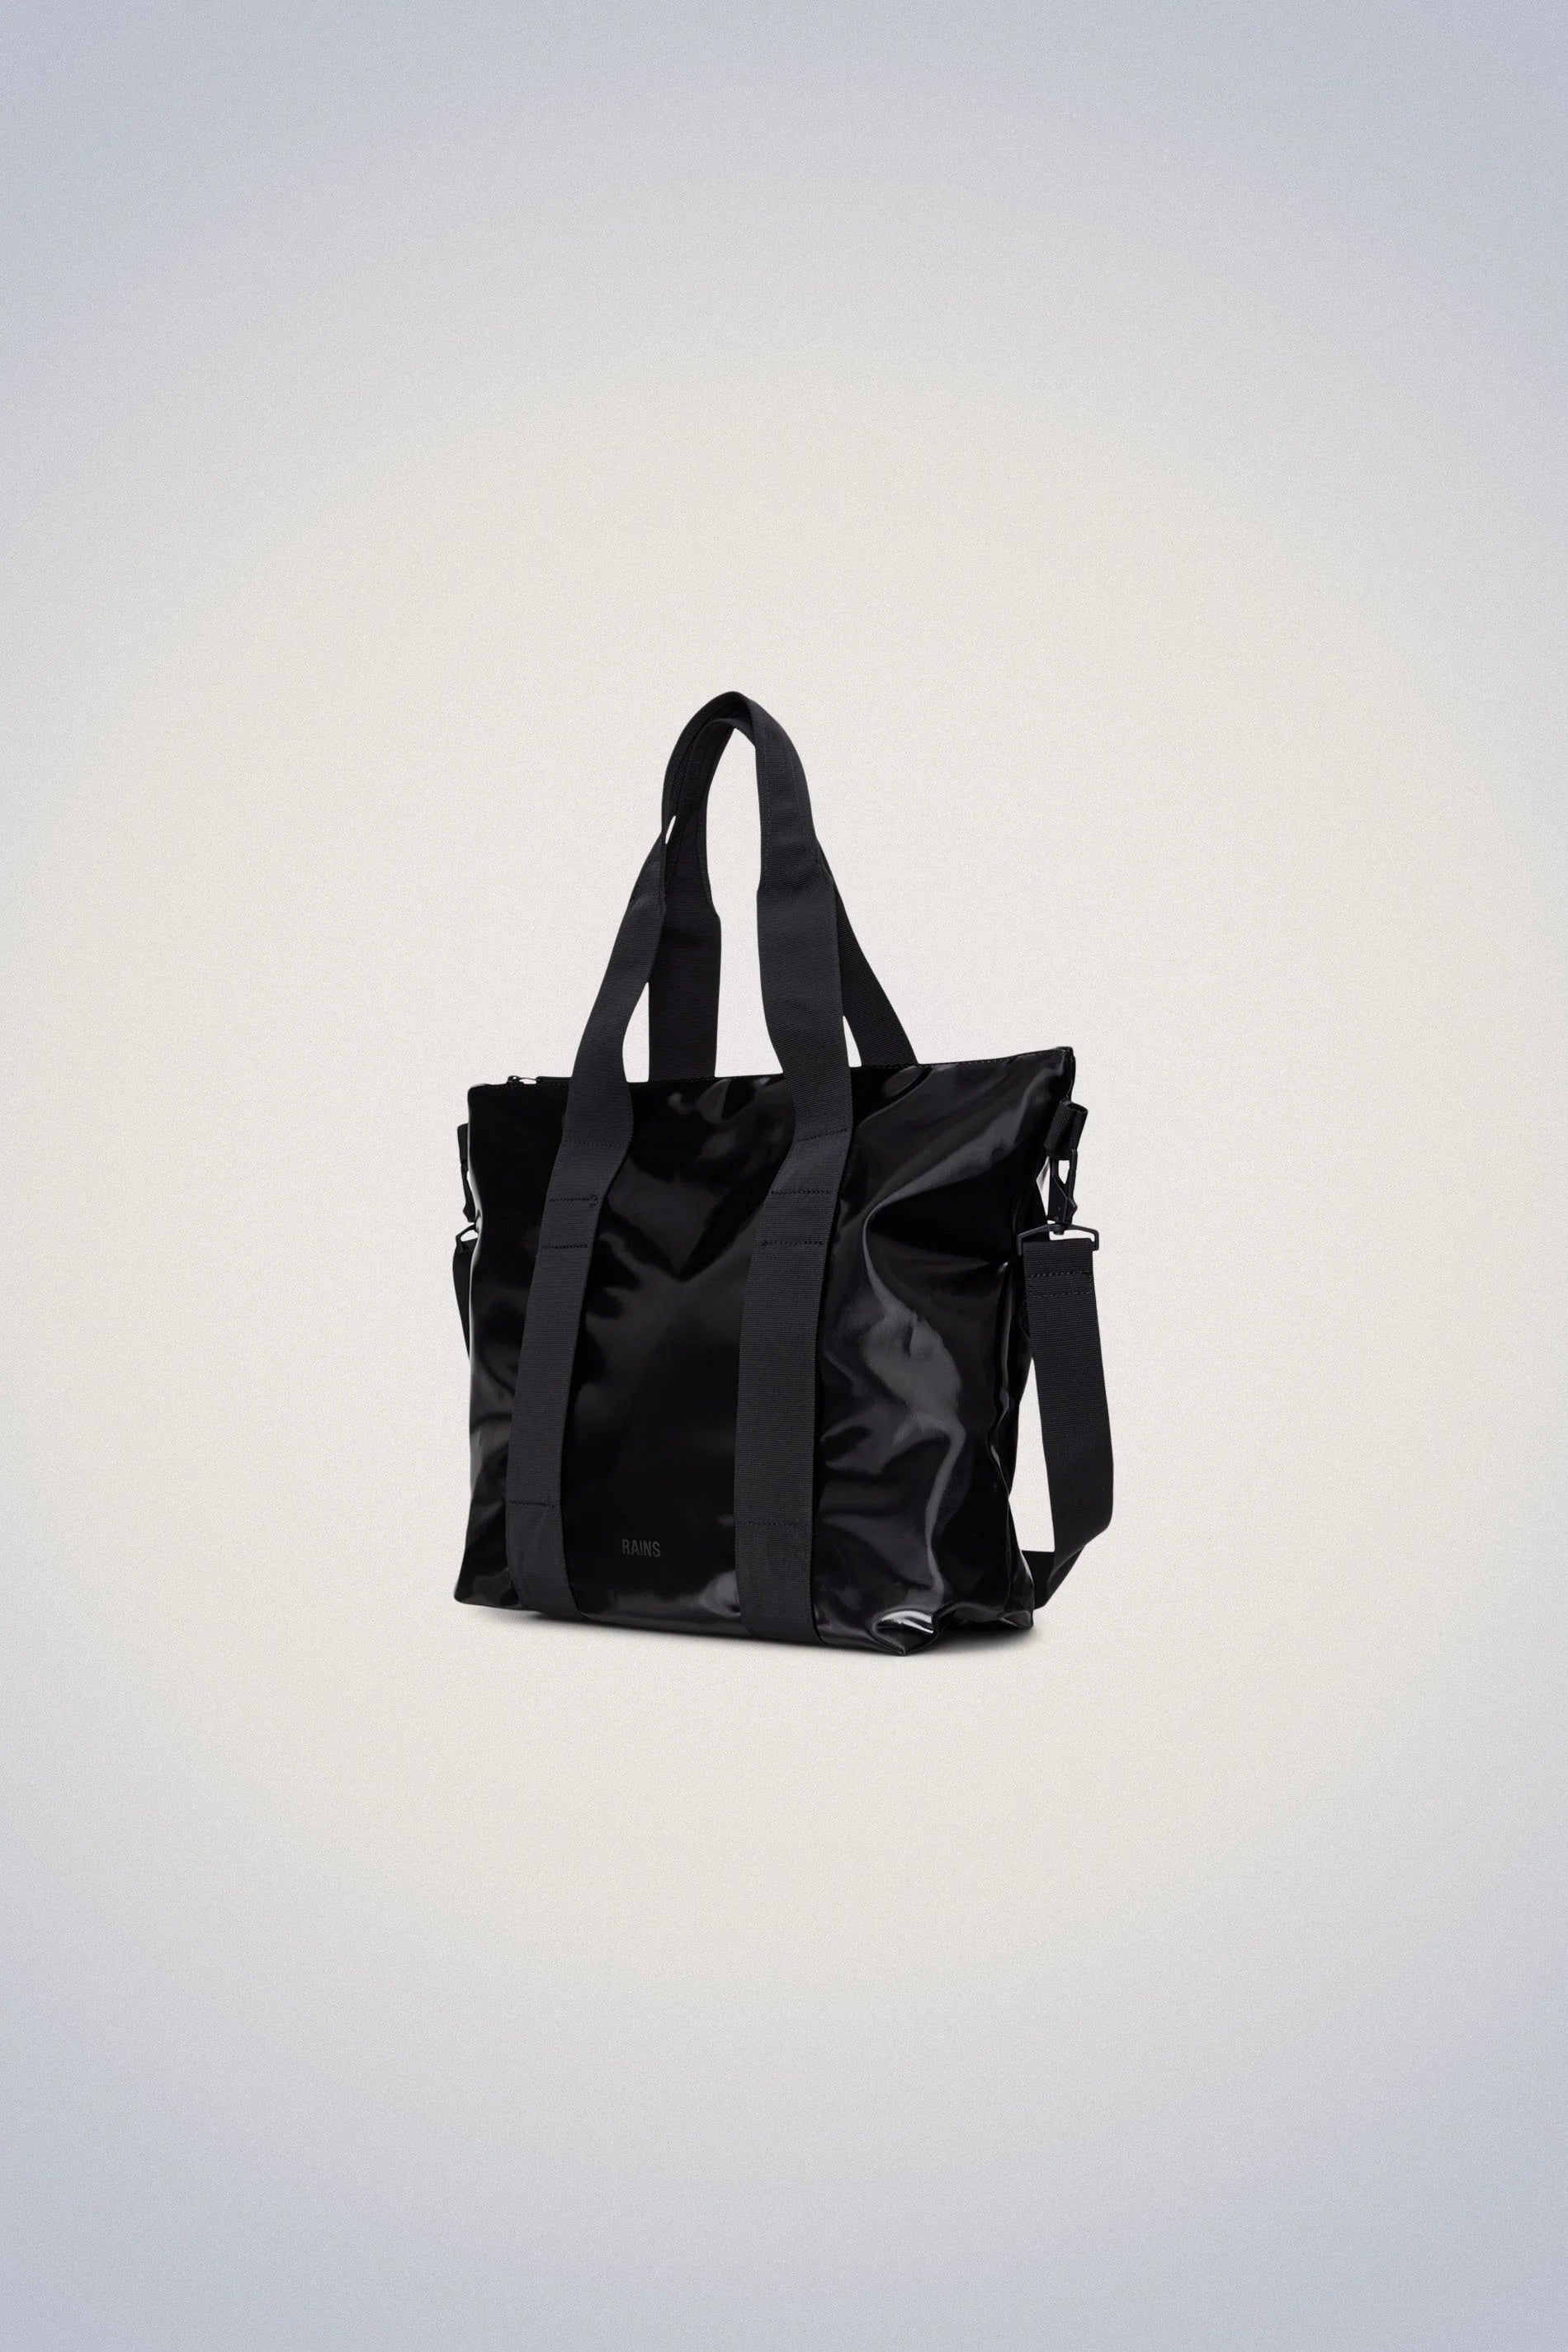 A Rains Tote Bag Mini - Night, with straps, featuring a magnetic closure and reinforced stitching for added durability.